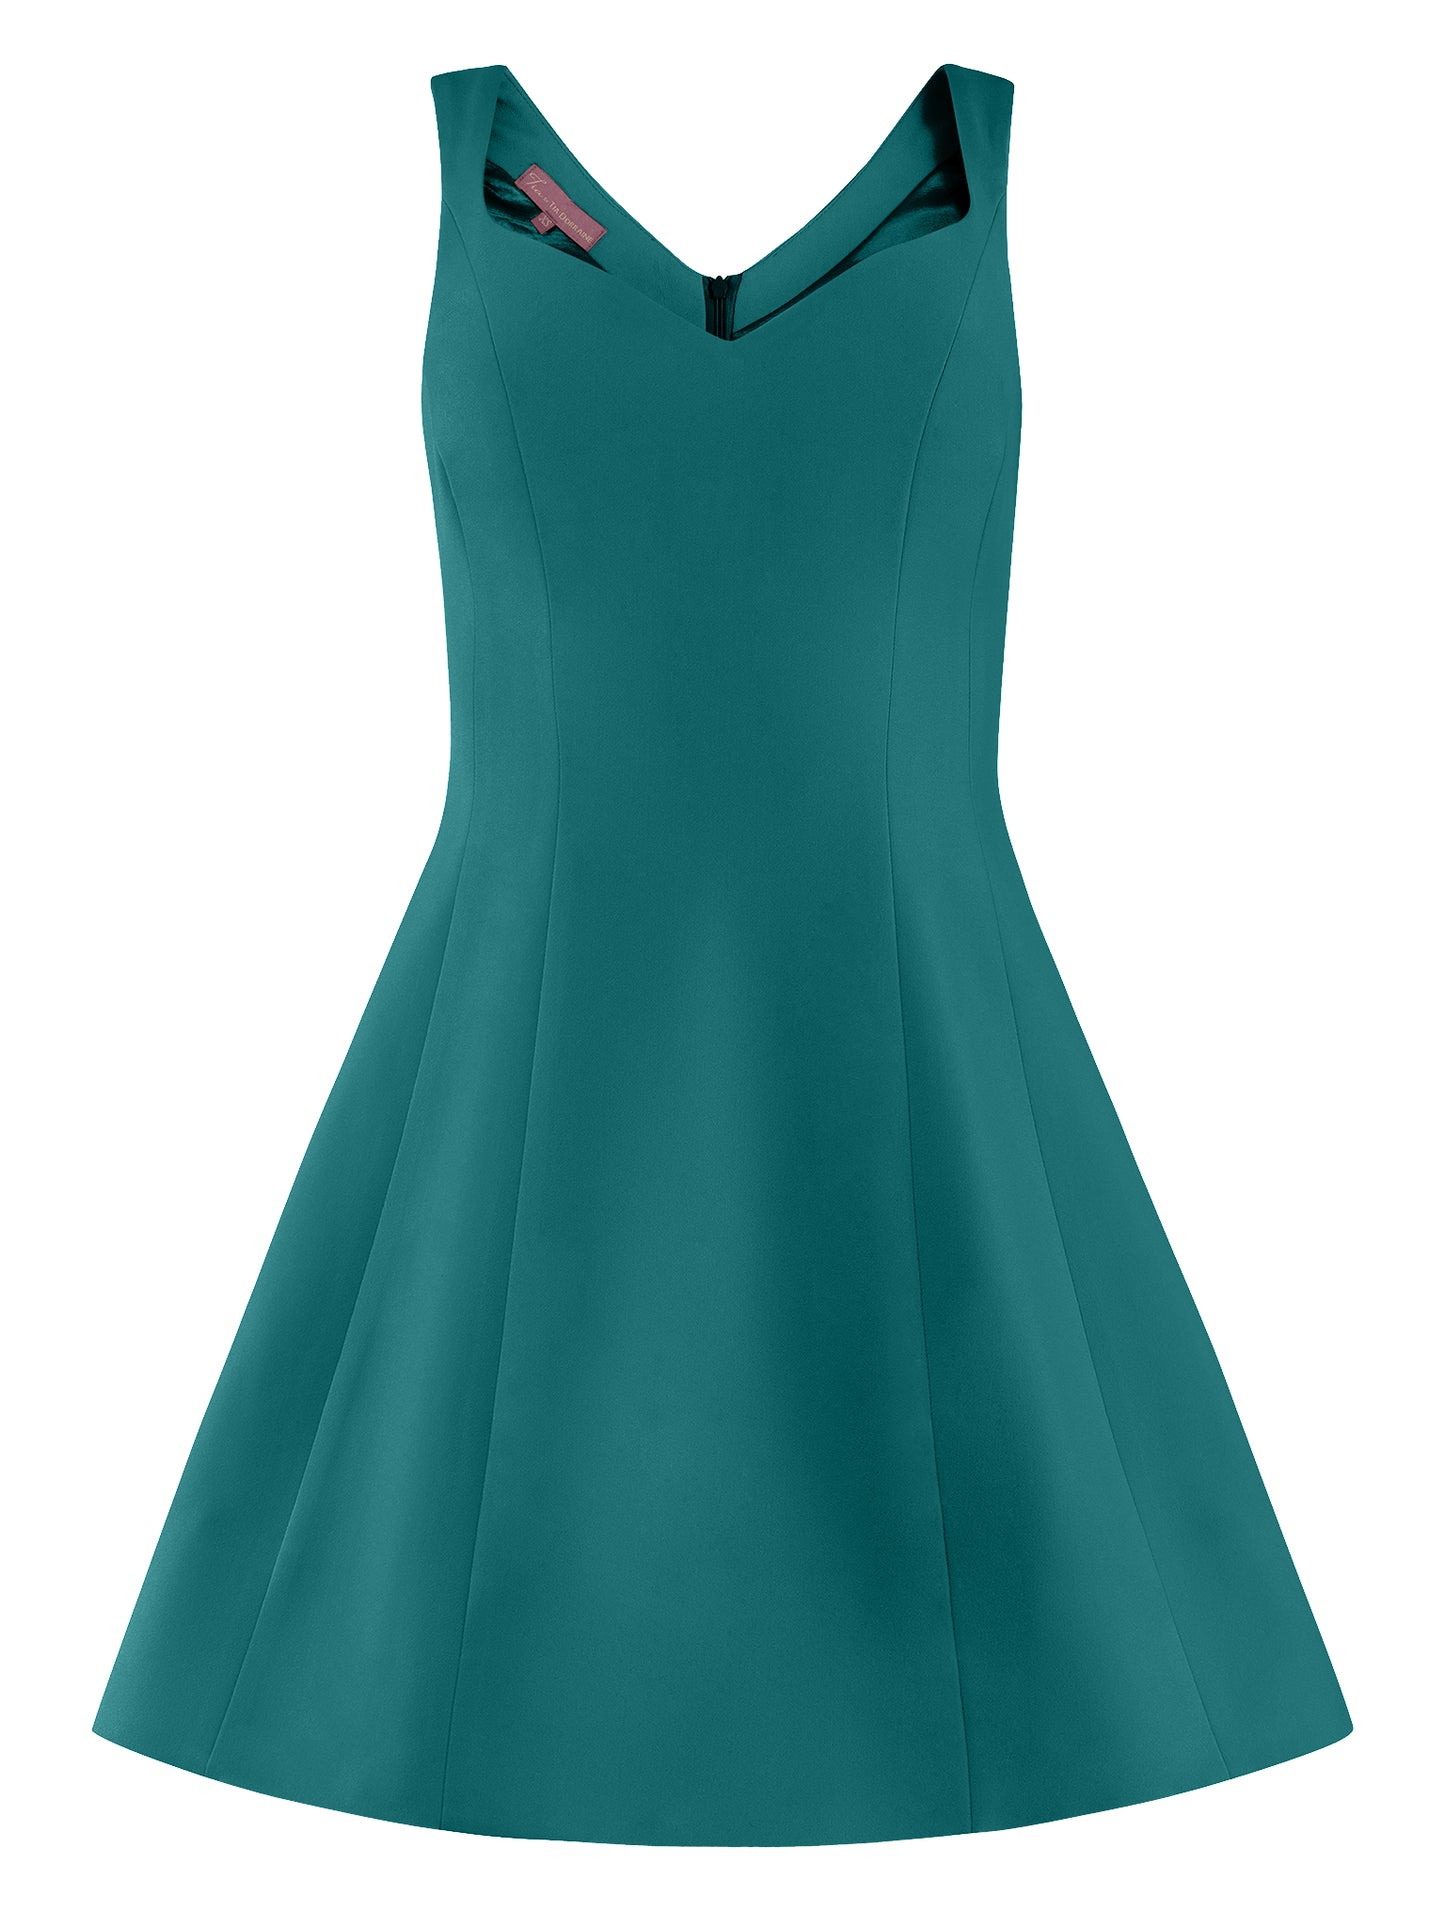 Tia DorraineLove Letter Flared Mini Dress - Magic BlueBring an air of effortless femininity to your edits with this romantic mini dress. Its sleeveless silhouette is cut from stretch crepe, detailed with a flattering sweetheart neckline, and a flared skir